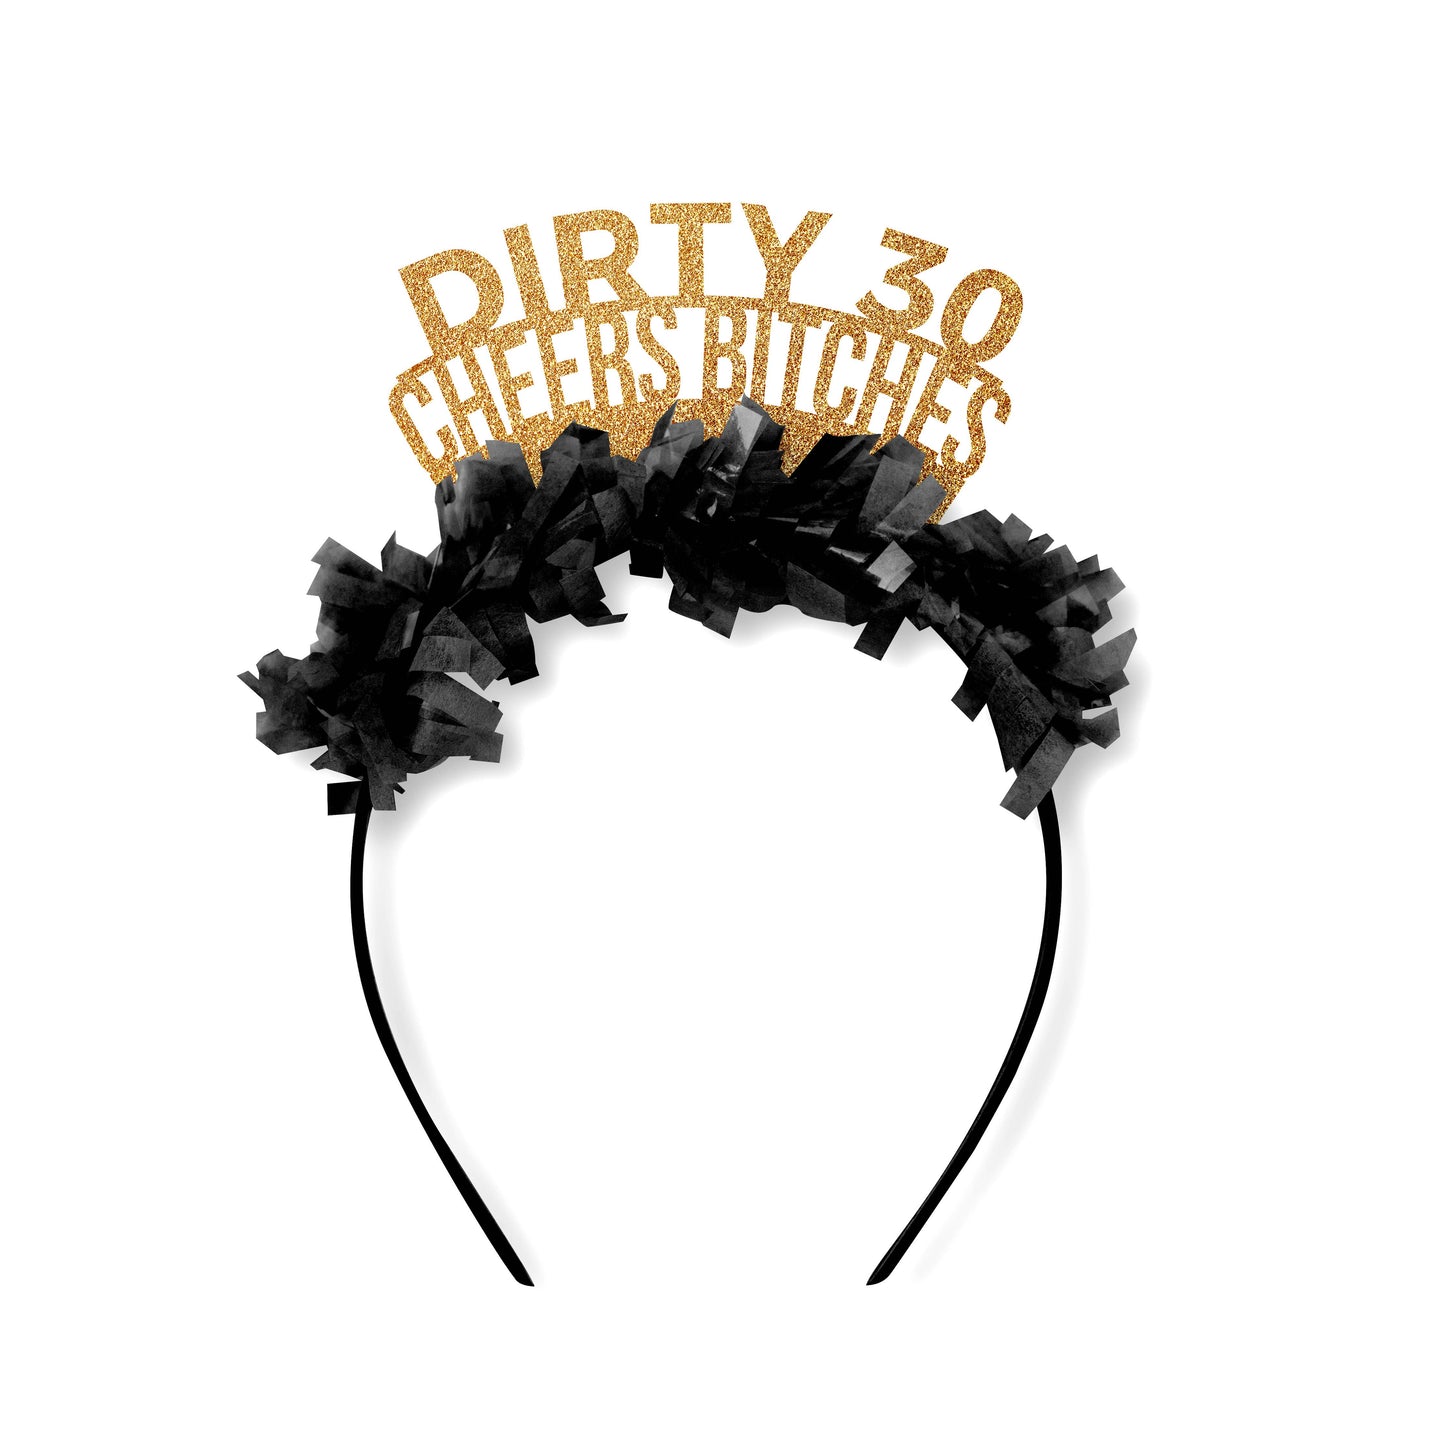 Festive Gal Party Headband: Dirty 30 Cheers Bitches - Gold/Black